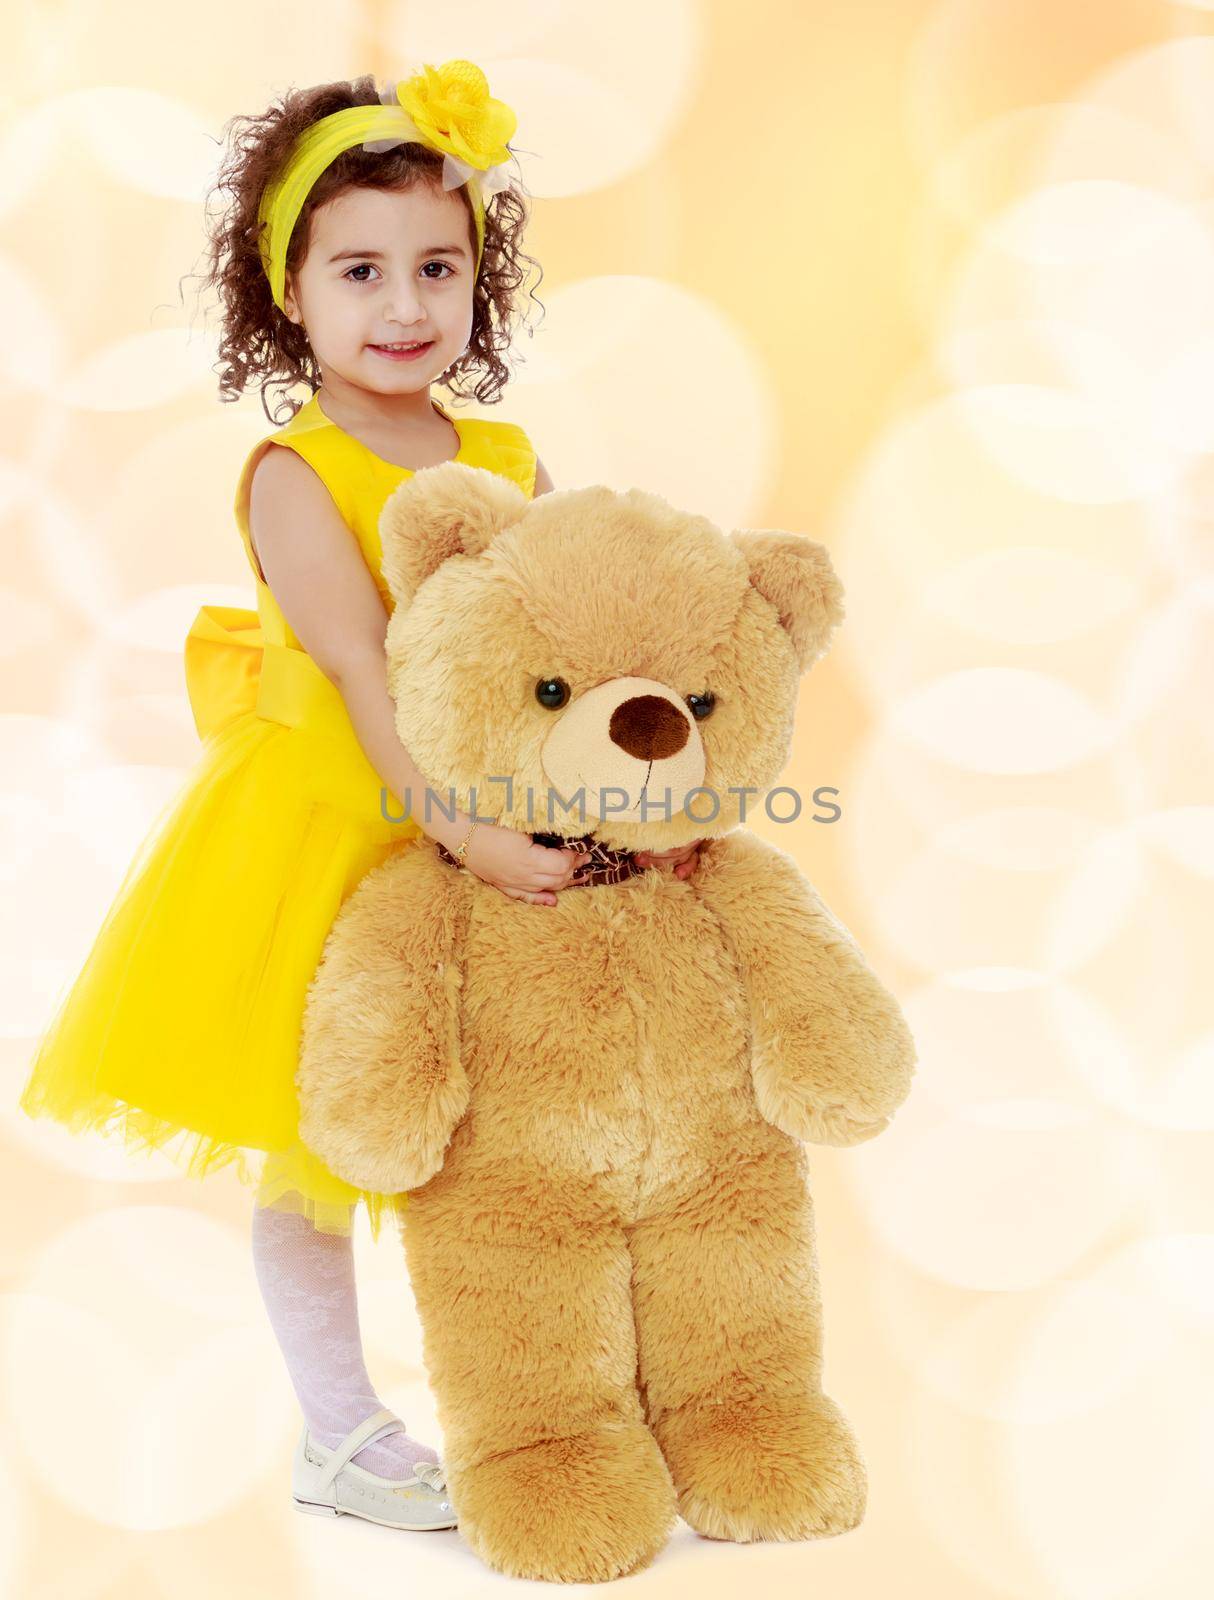 Joyful little girl Princess, dressed in a yellow dress, hugging a big Teddy bear. Standing at full height.Winter brown abstract background with white snowflakes.